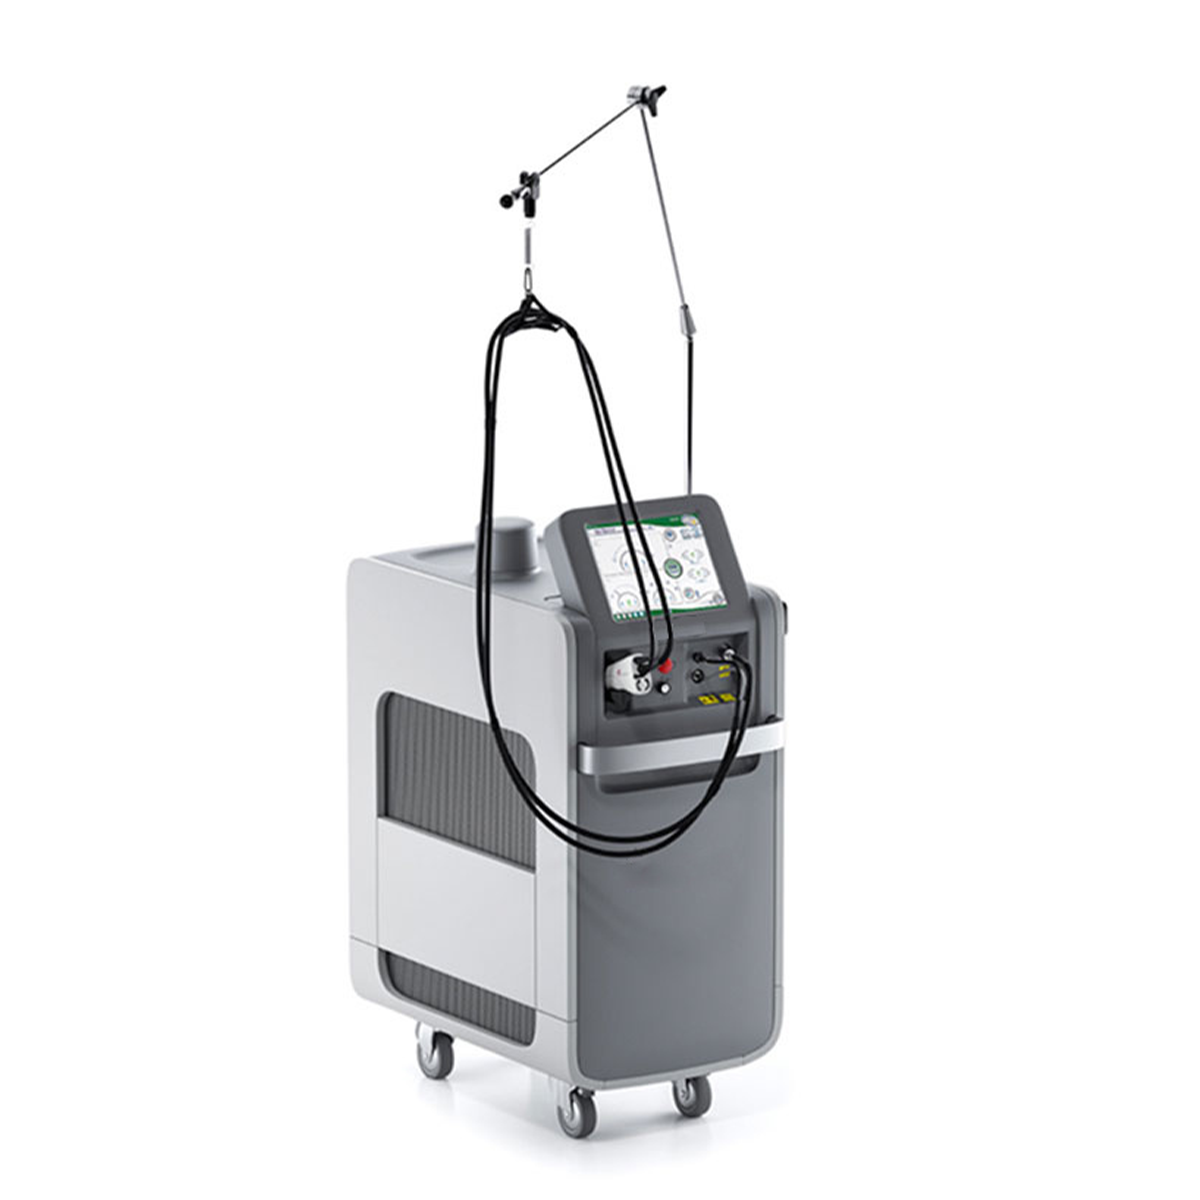 Gentle Max Professional Alexandrite ND Yag Laser Device 755nm Hair Removal Machine Trade Price Featured Image